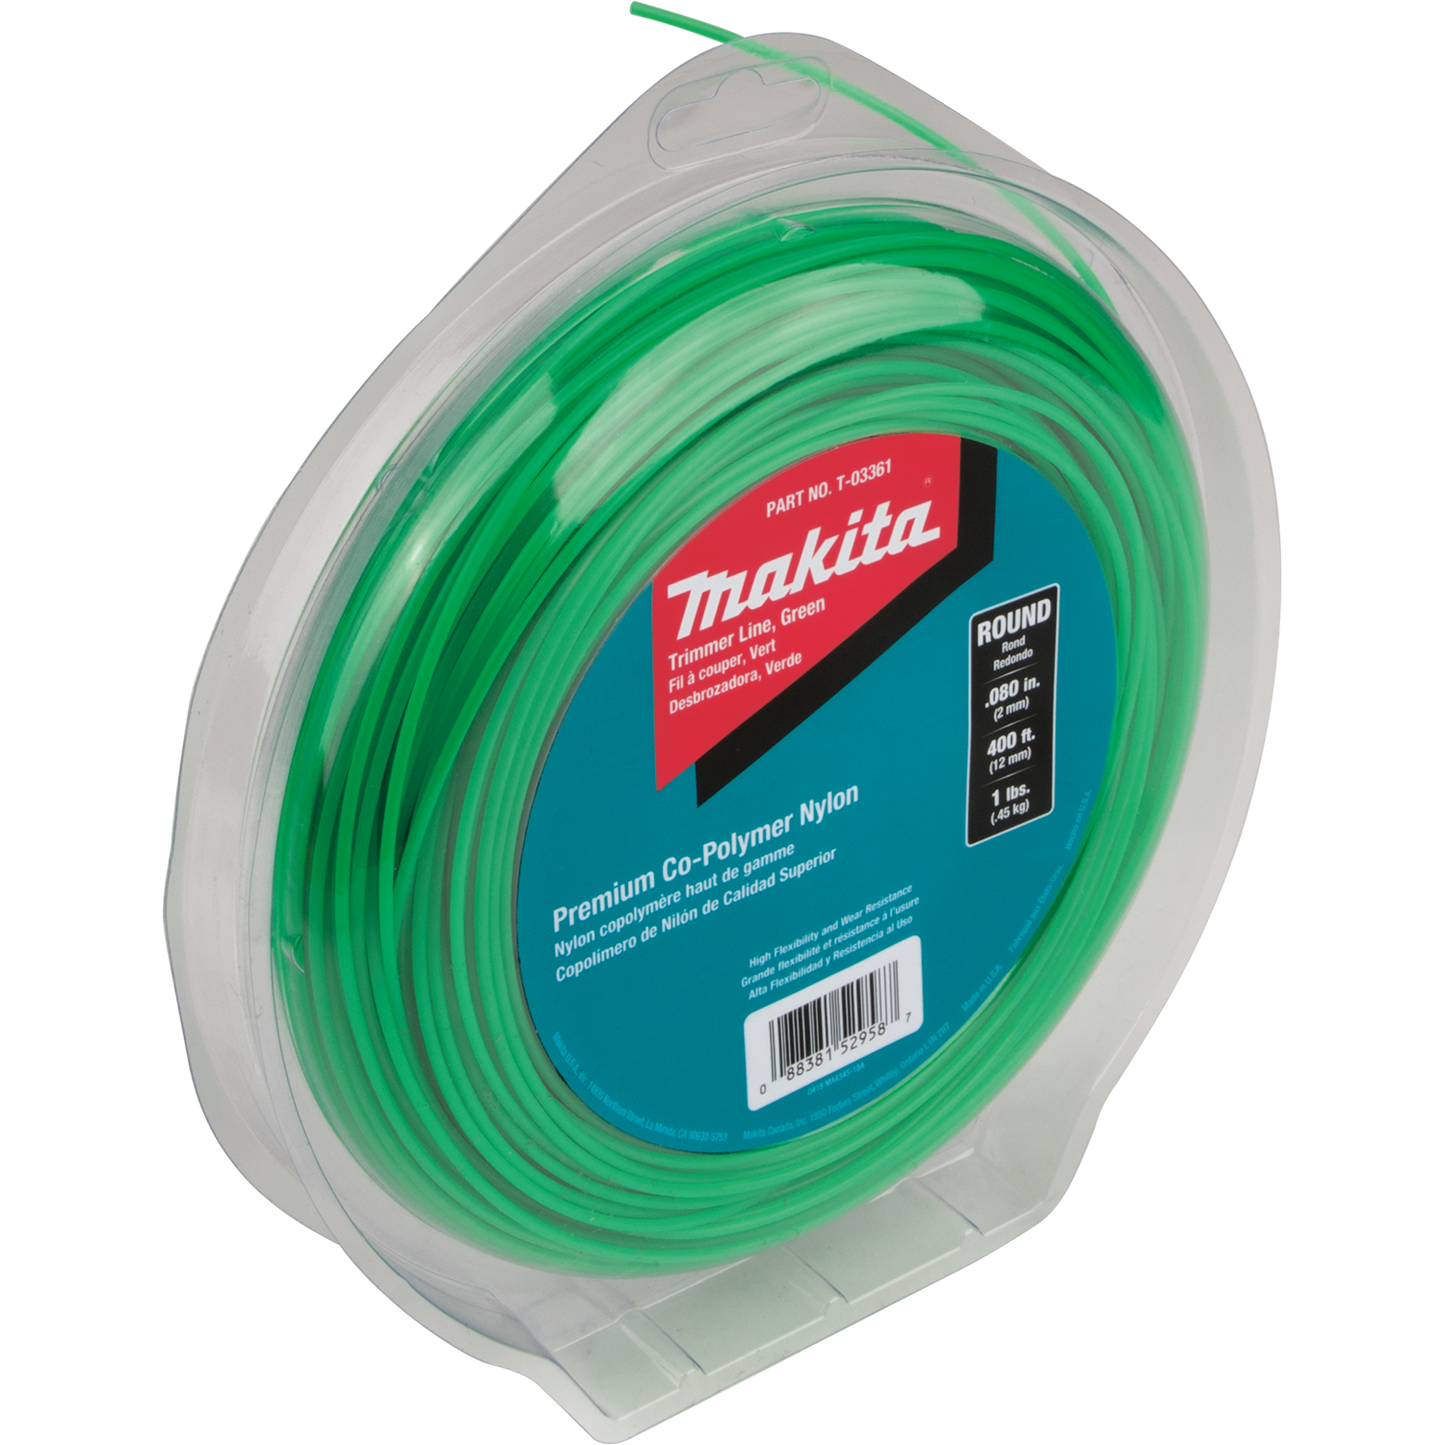 Makita T-03361 Round Trimmer Line, 0.080”, Green, 400’, 1 lbs.